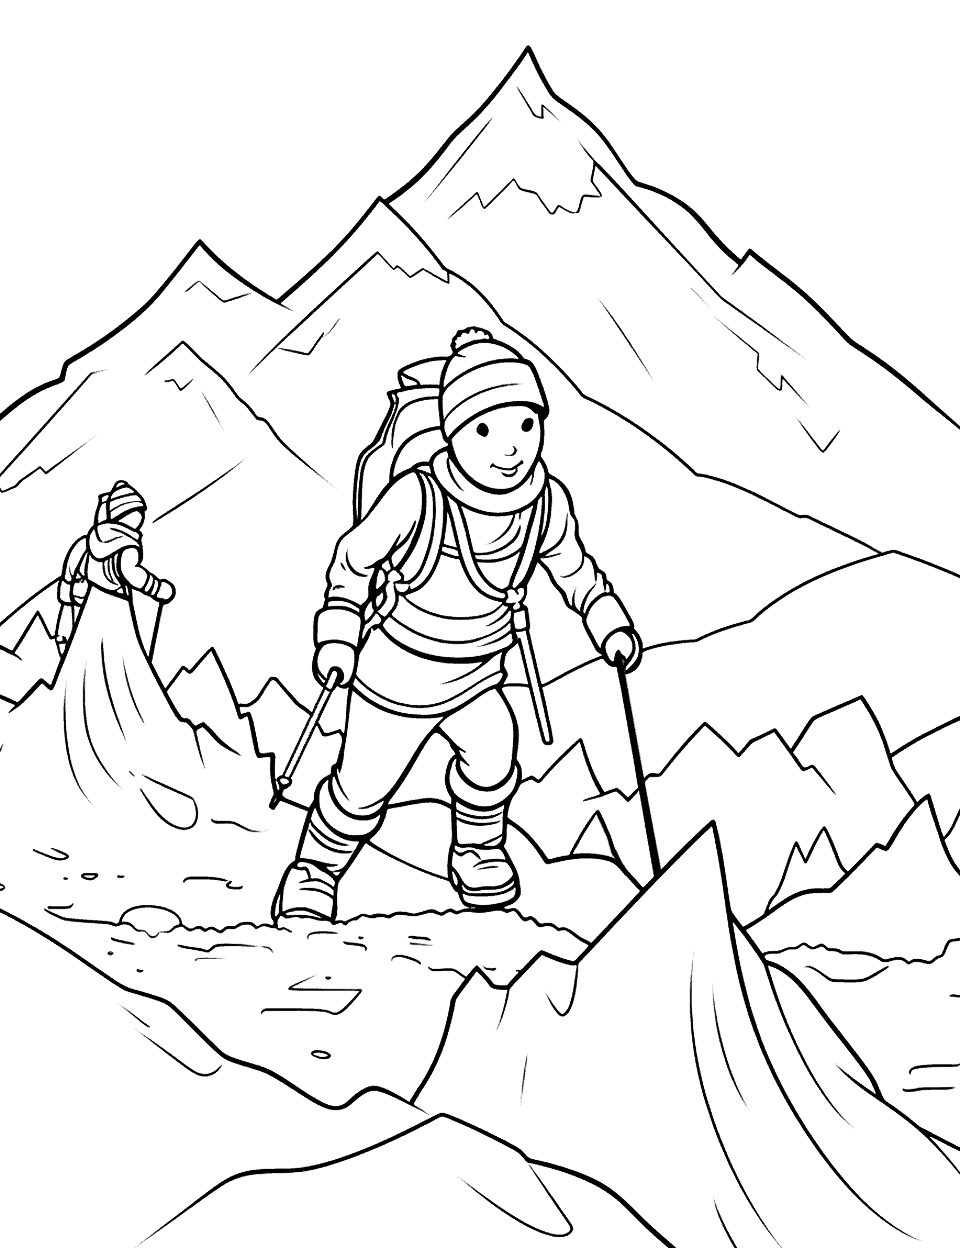 Snowy Mountain Climbing Winter Coloring Page - An adventurous scene of climbers scaling a snowy mountain.